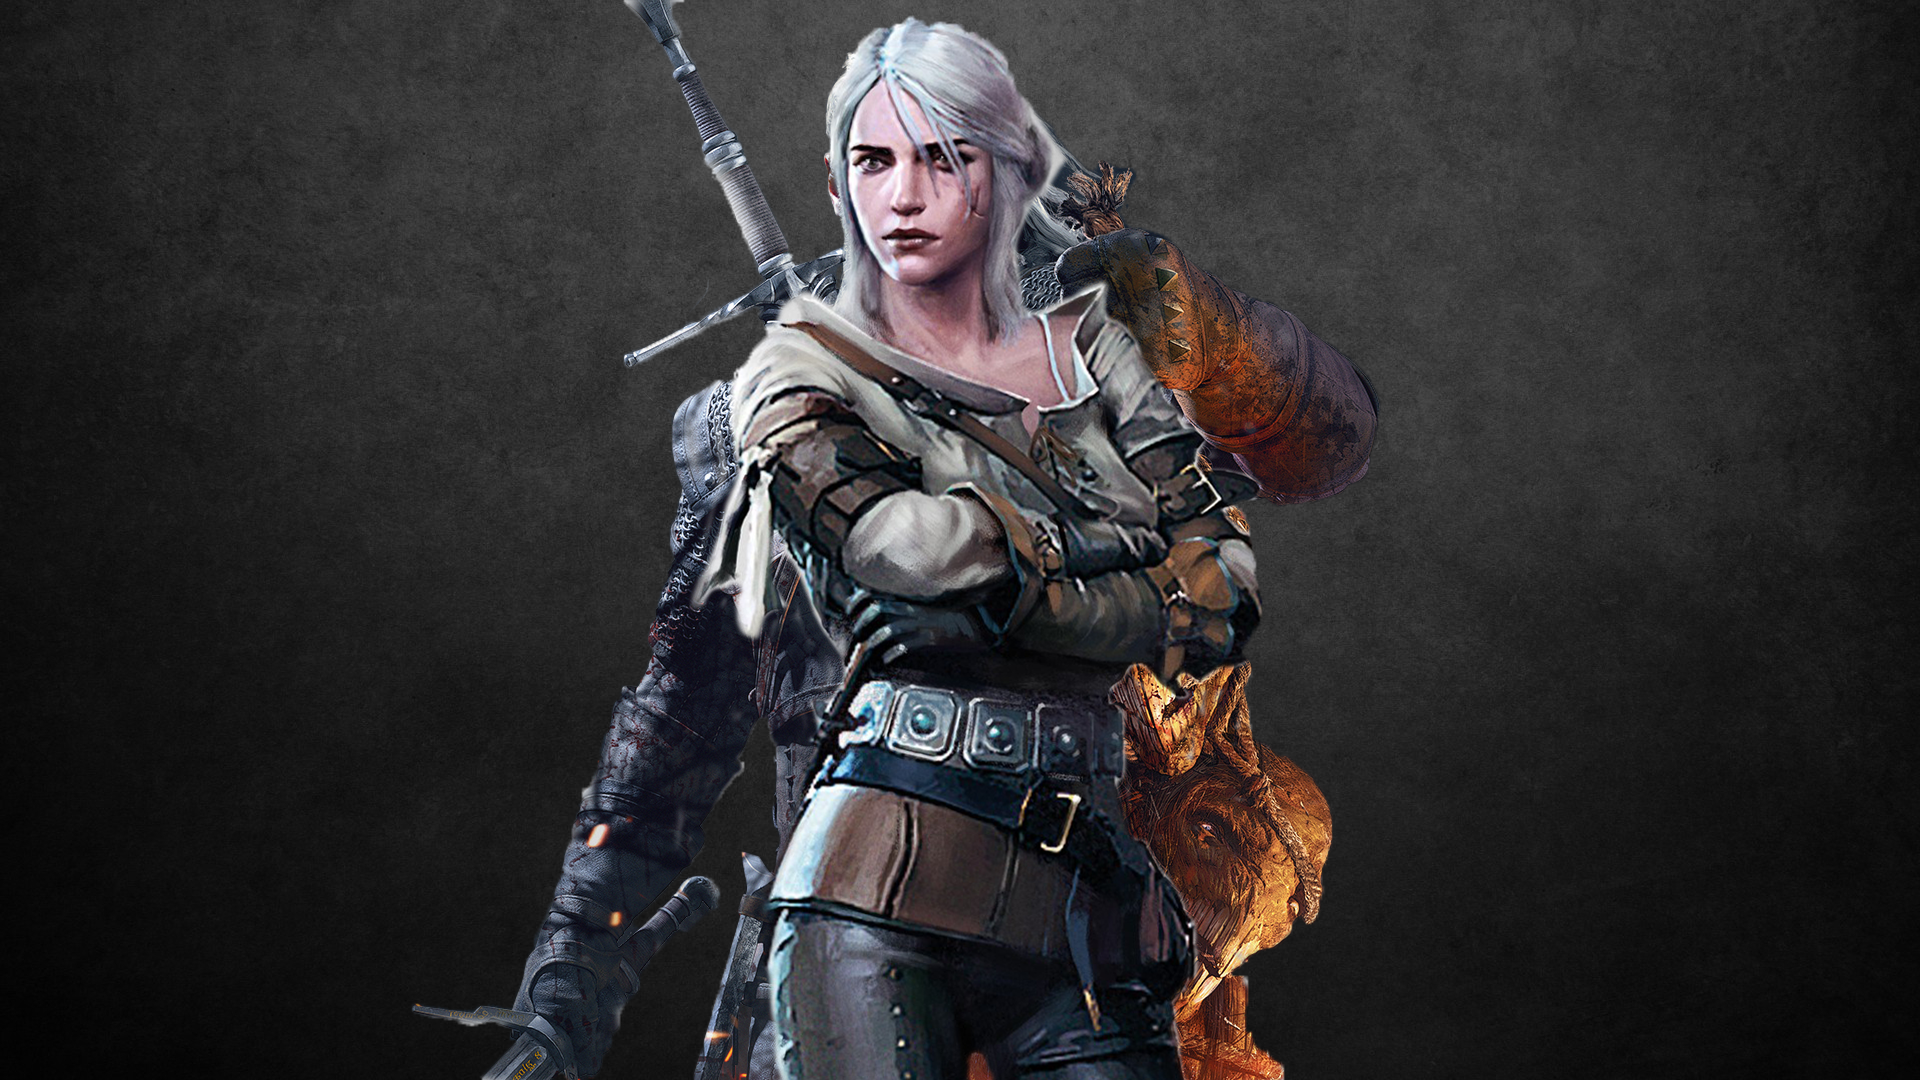 ciri wallpaper,action figure,action adventure game,pc game,games,fictional character